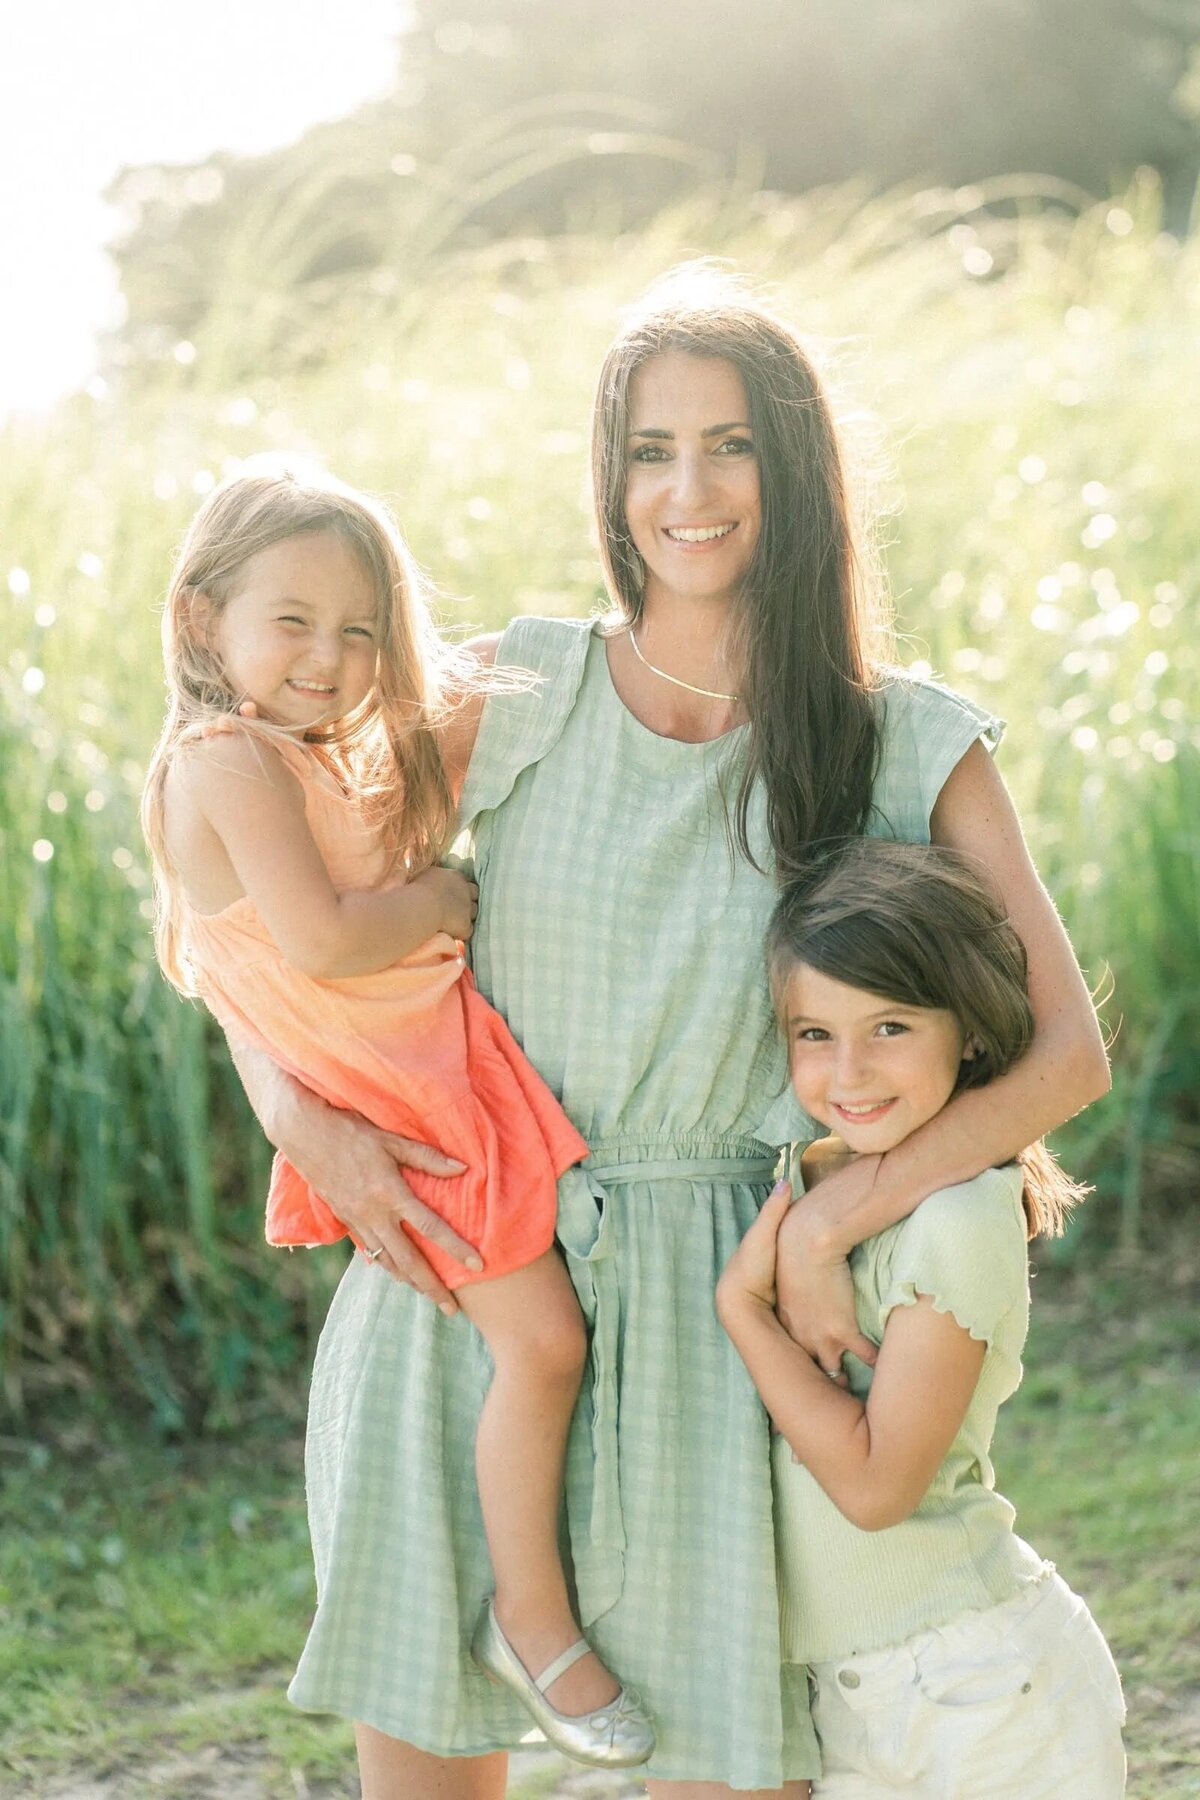 A mom holding one kid in her arm with her other arm over another child's shoulder.